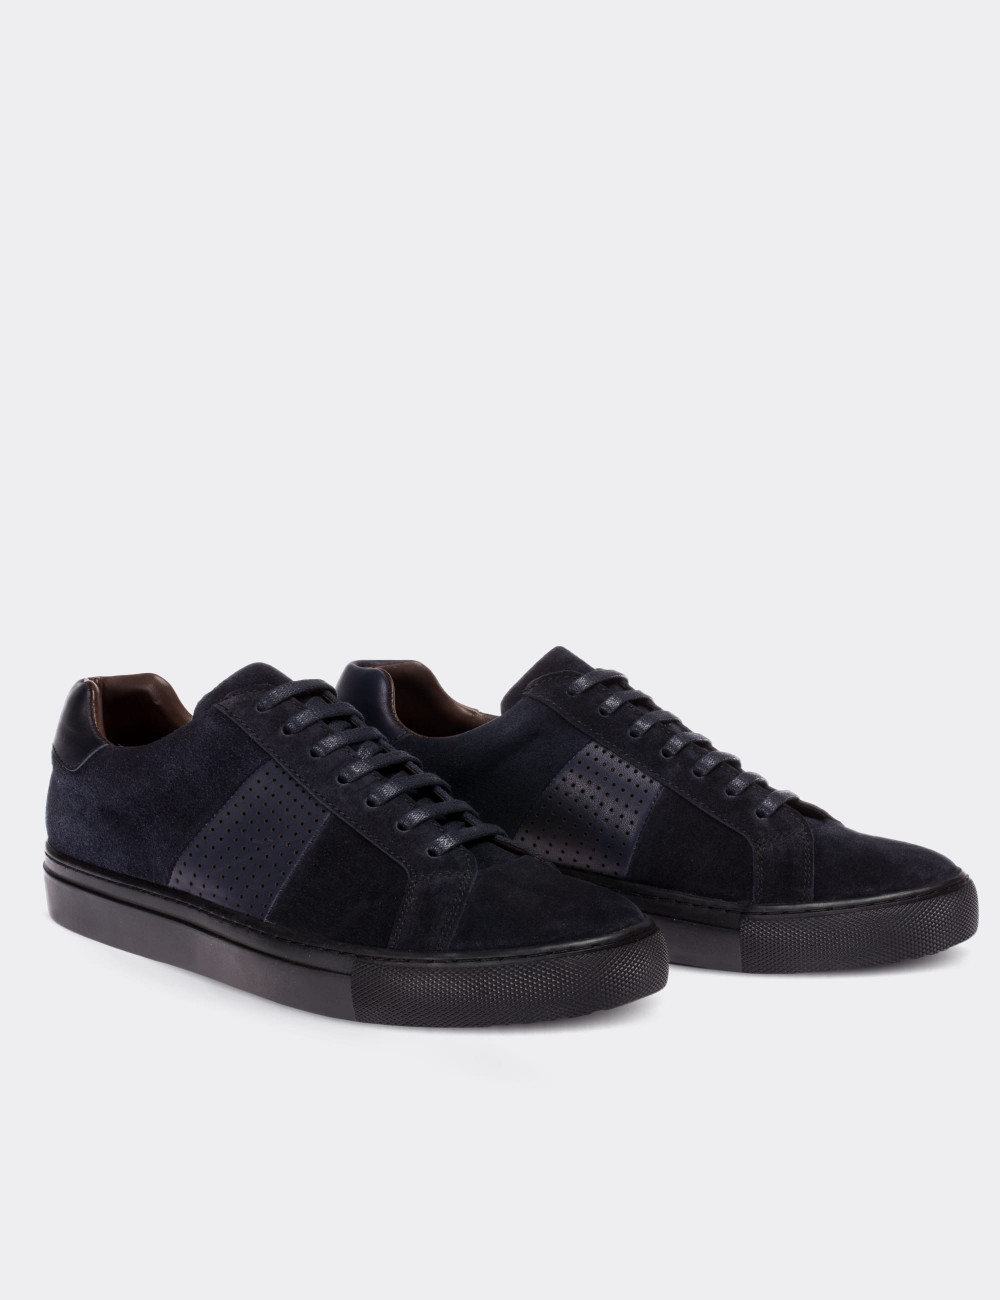 Navy Suede Leather Sneakers - 01740MLCVC01